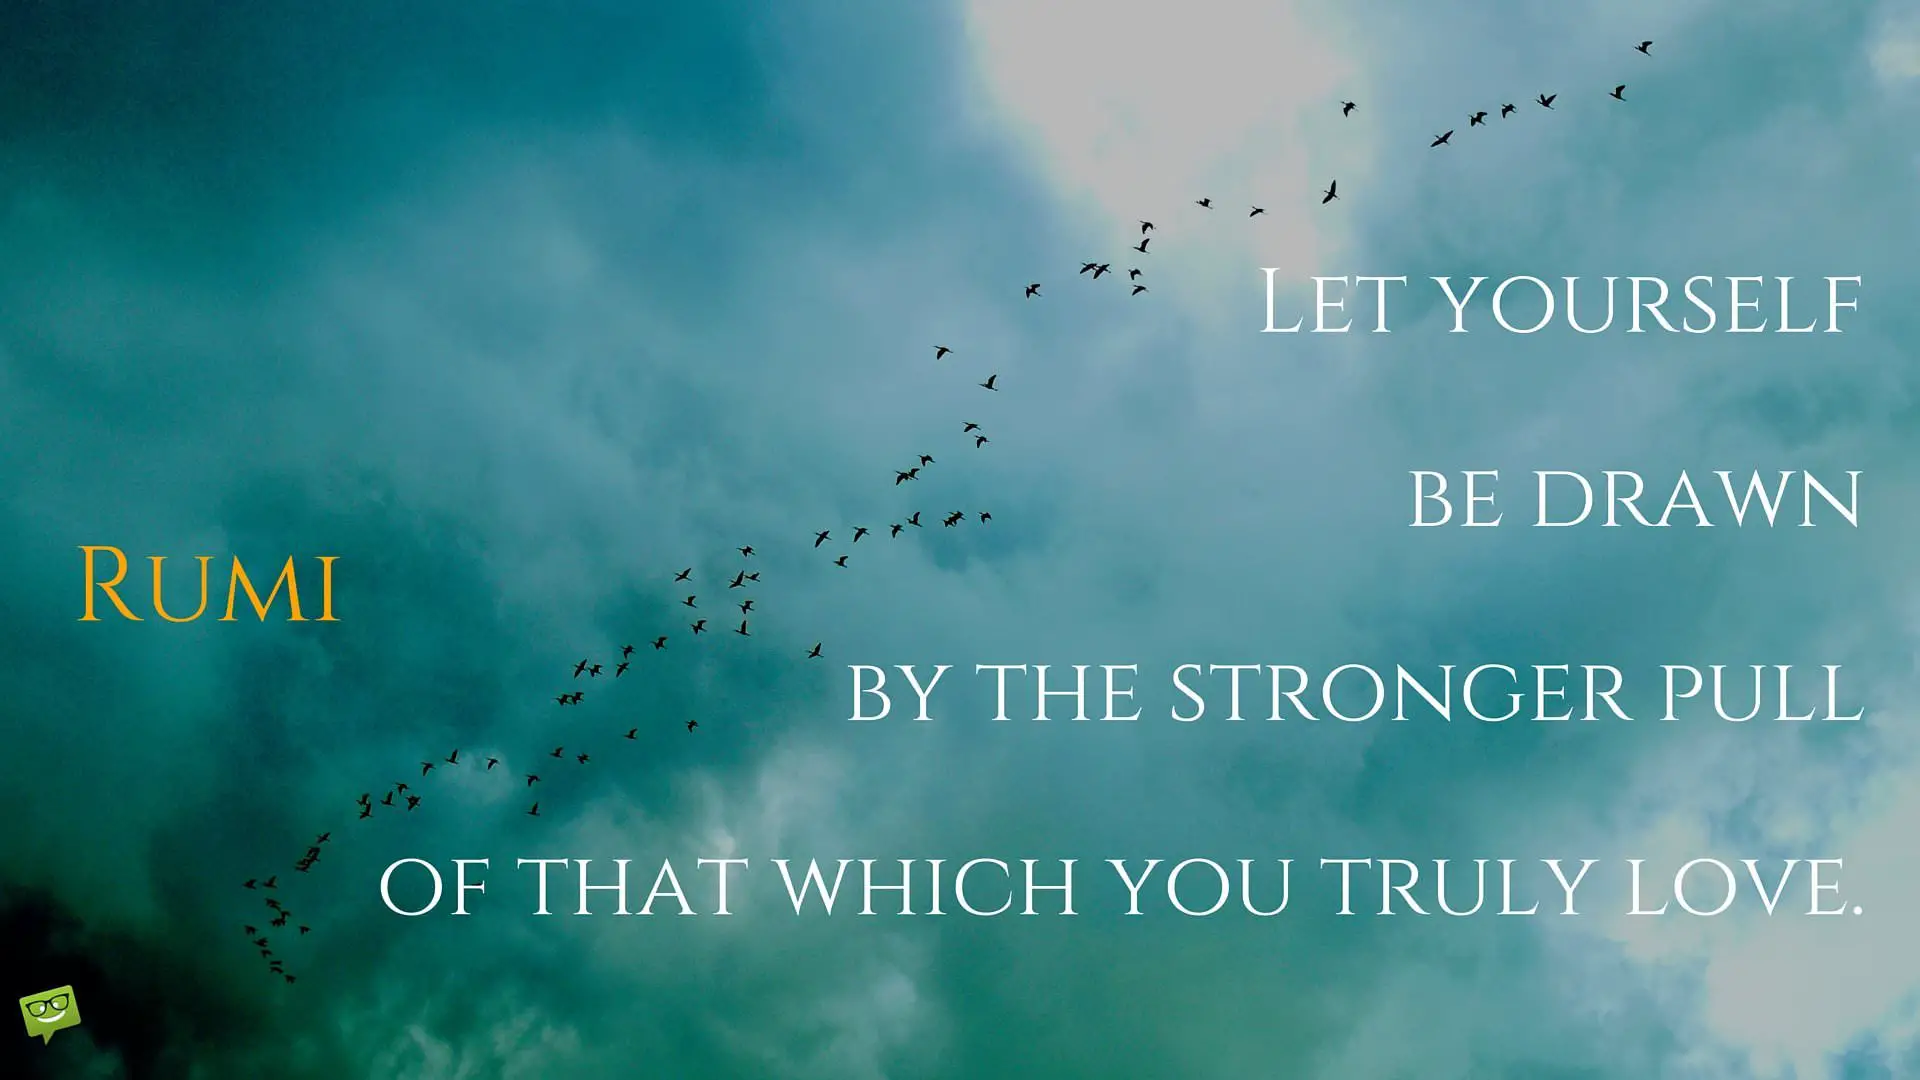 Let-yourself-be-drawn-by-the-stronger-pull-of-that-which-you-truly-love.-Rumi-Quote.jpg